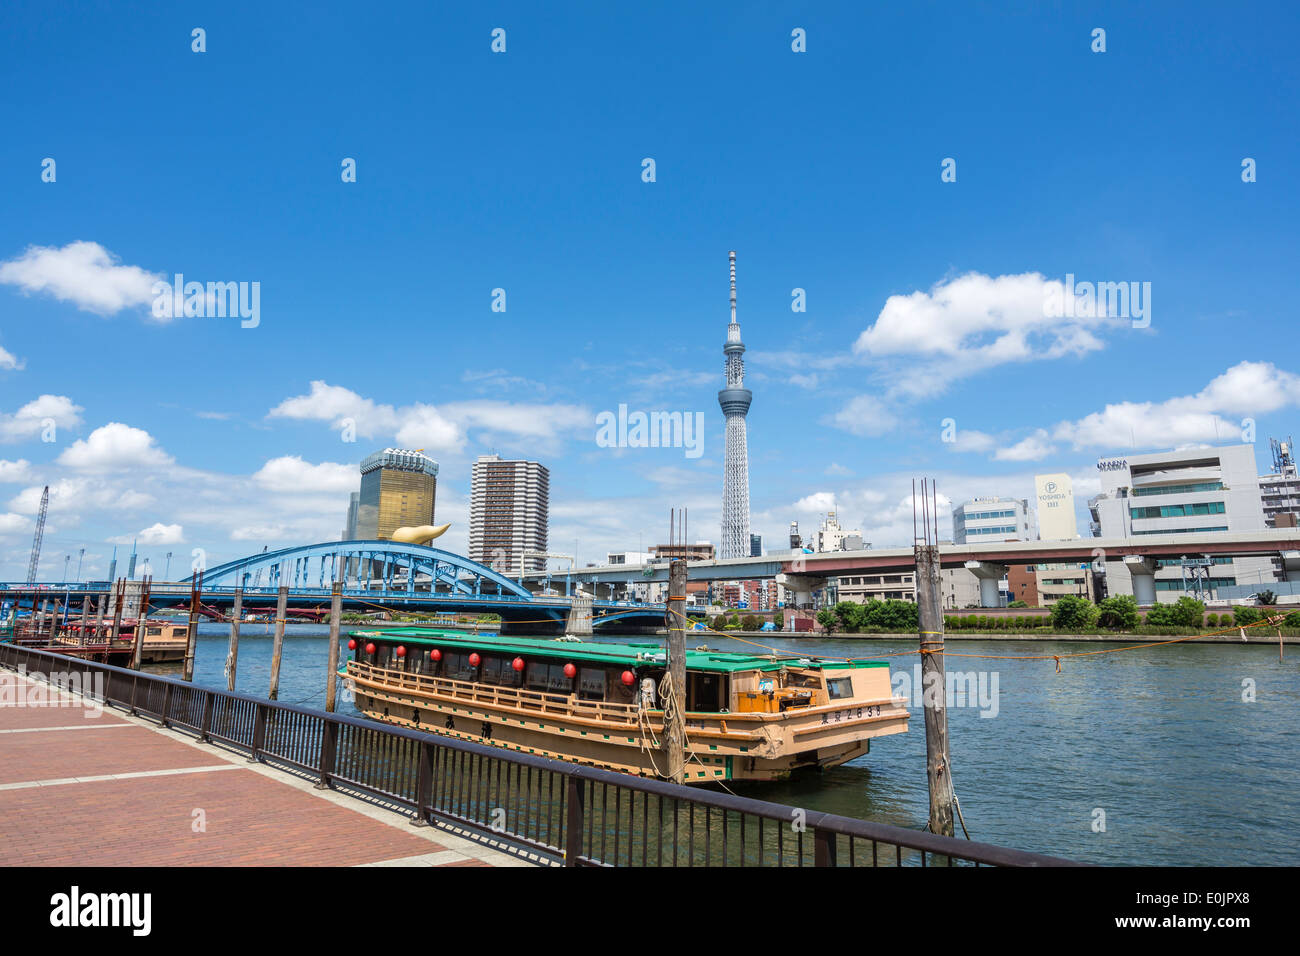 Tokyo skytree and Sumida River in Tokyo Stock Photo